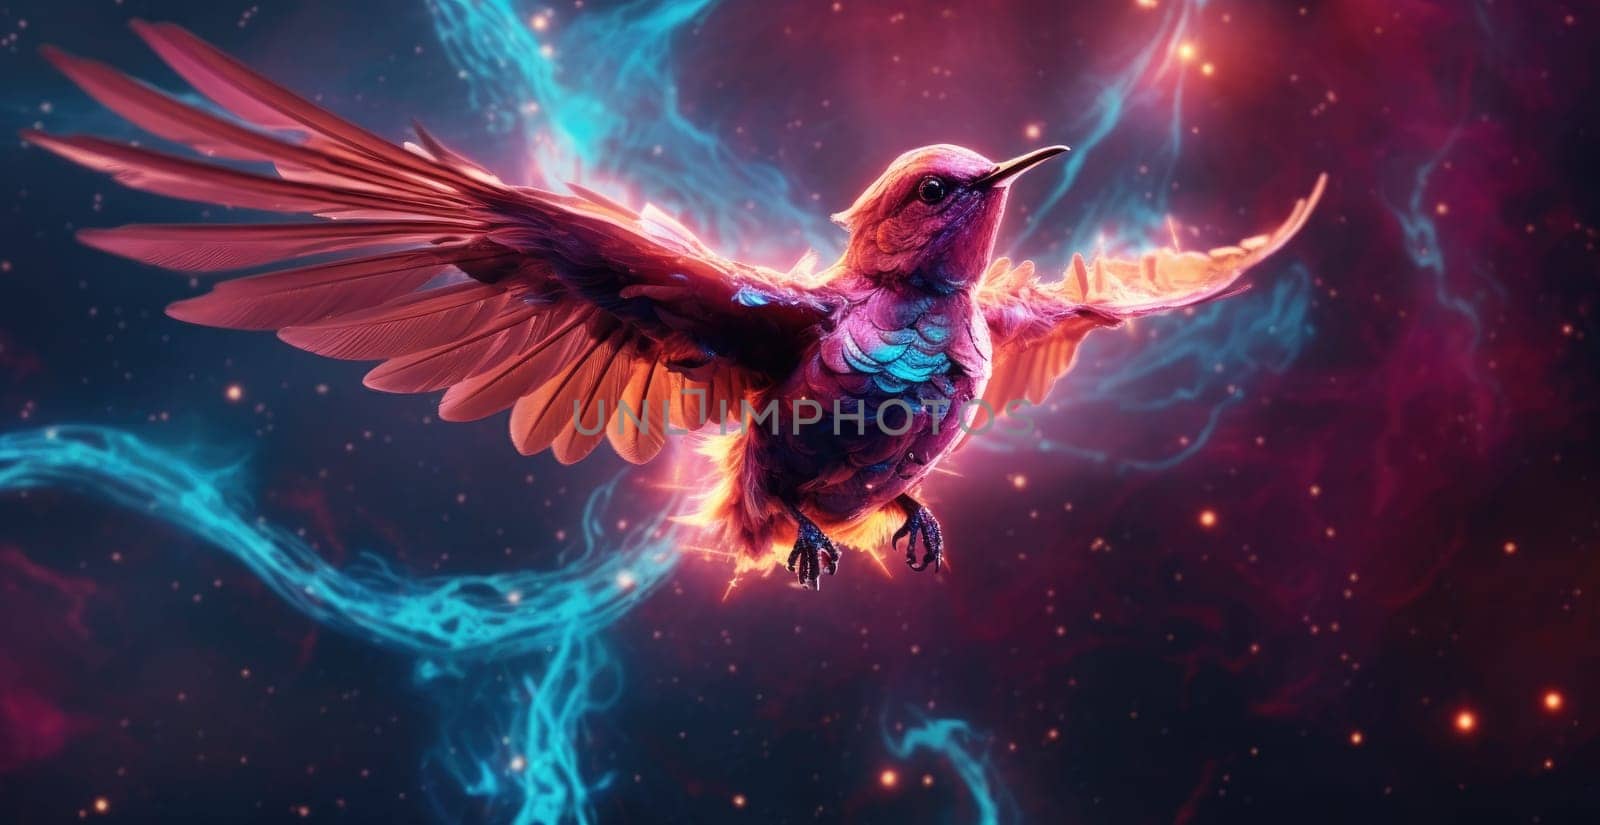 A small colorful phoenix against the background of a cluster of gallactic